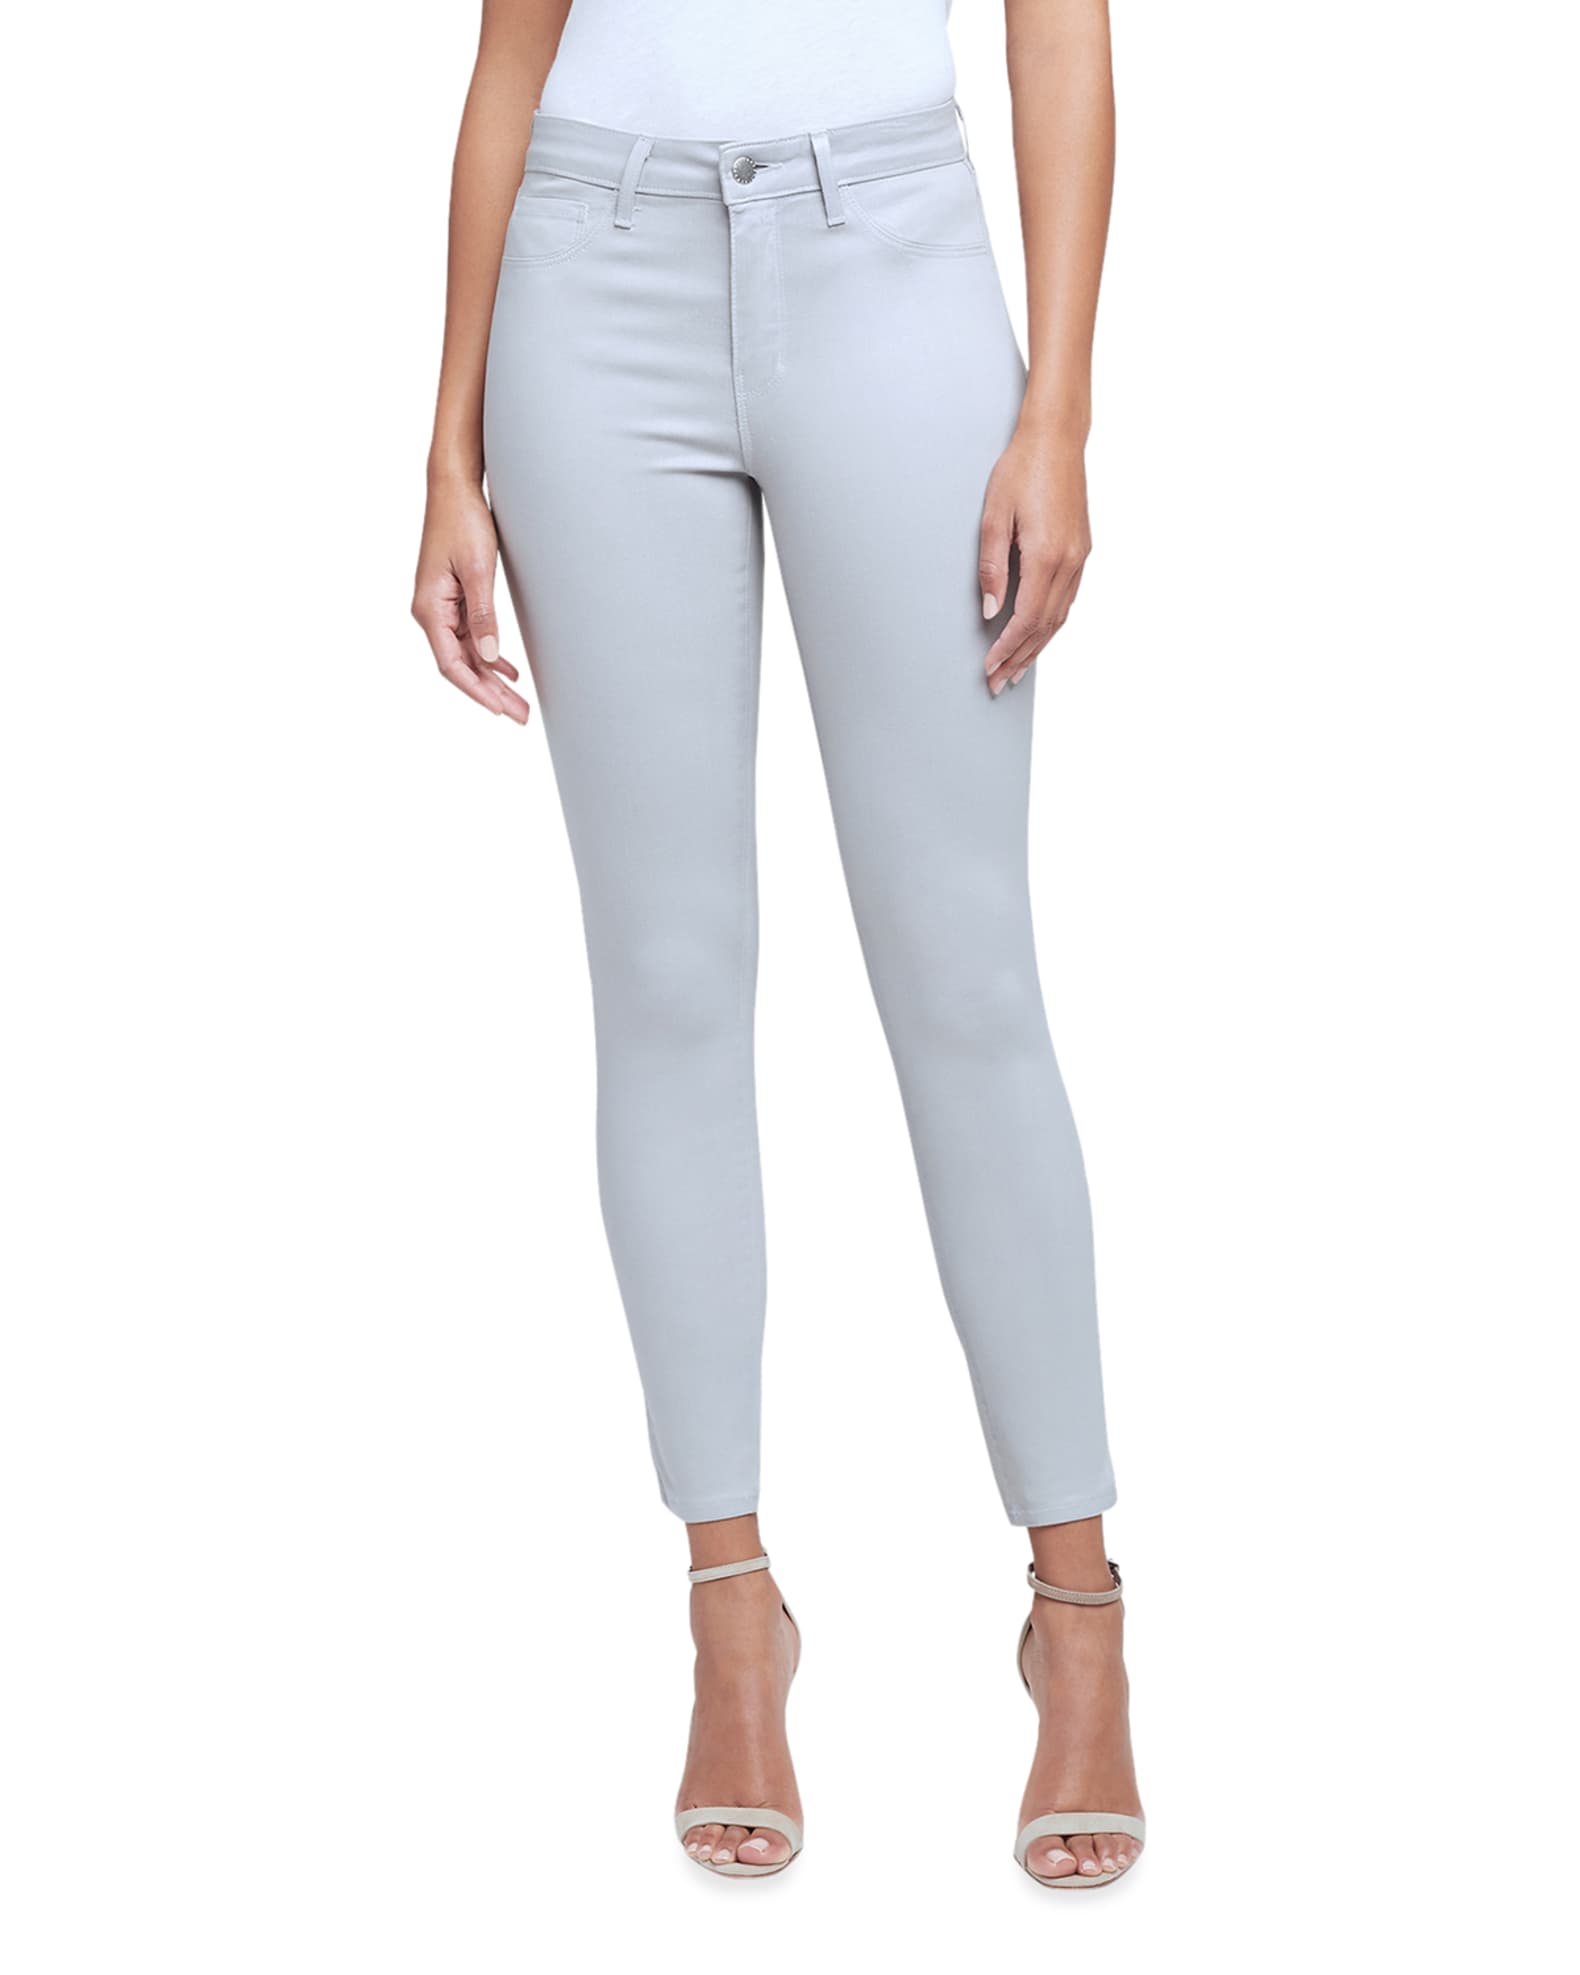 L'Agence Margot High-Rise Coated Skinny Jeans | Neiman Marcus